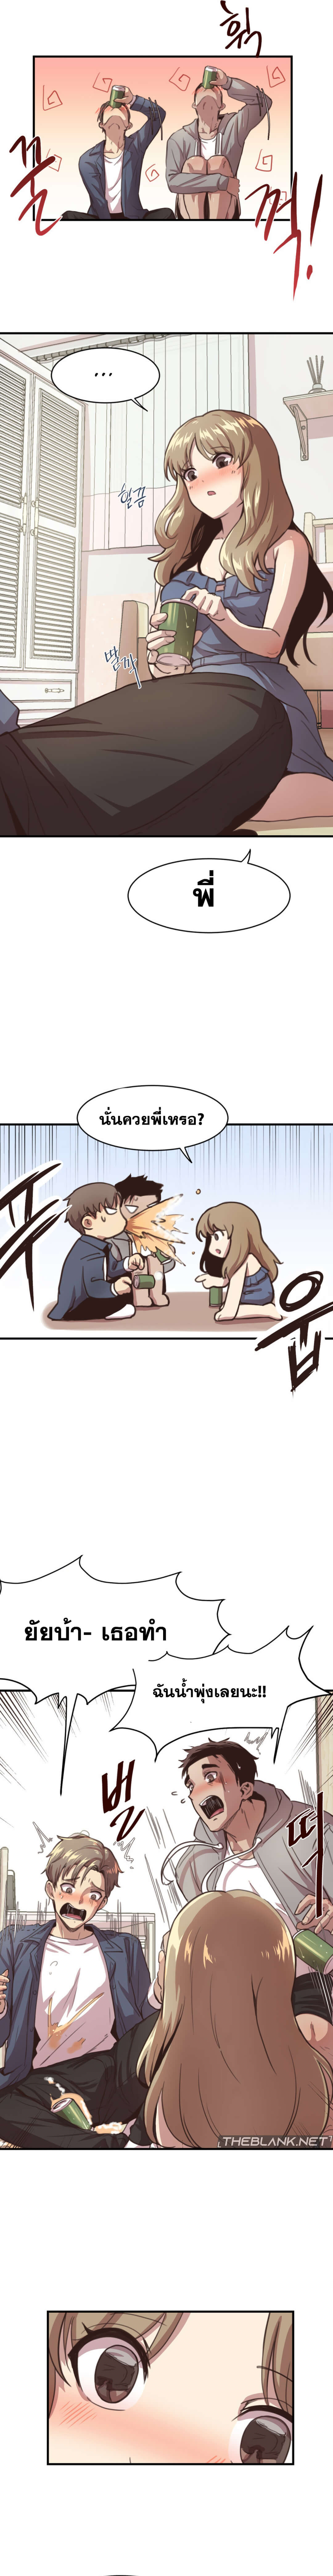 With My Brother’s Friends ตอนที่ 2 ภาพ 11